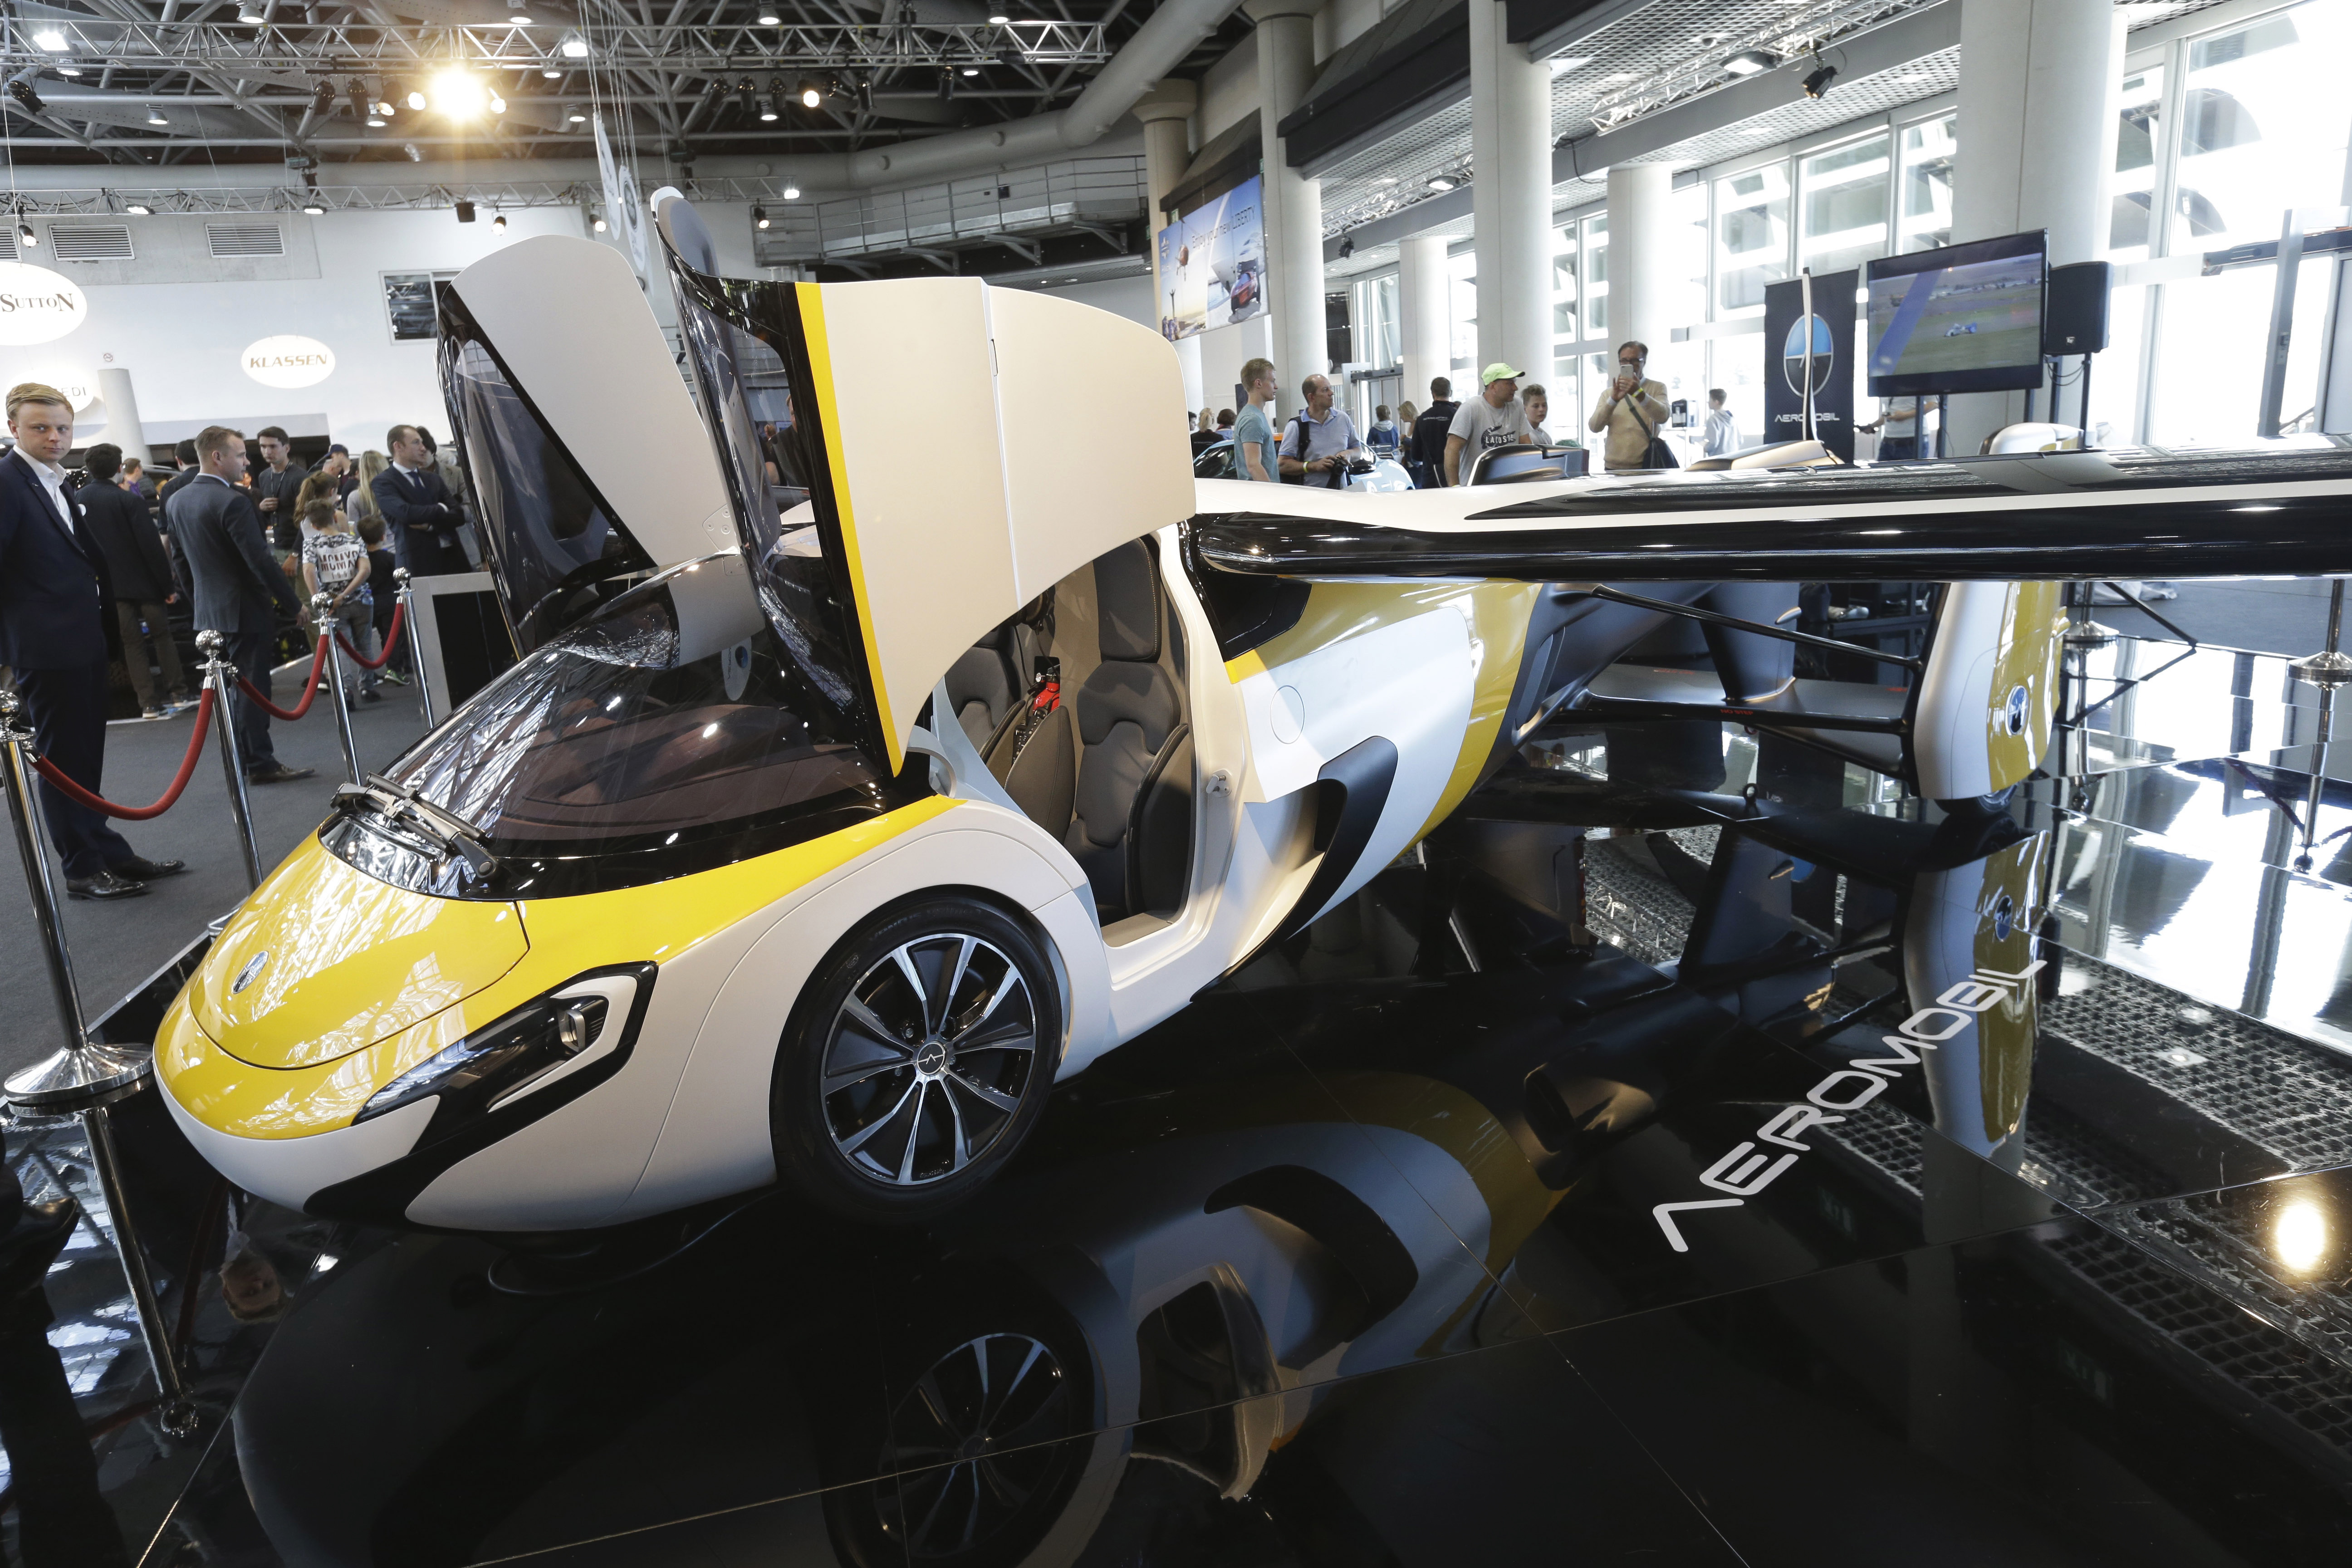 AeroMobil display their latest prototype of a flying car, in Monaco, Thursday, April 20, 2017. The light frame plane whose wings can fold back, like an insect is boosted by a rear propeller. The company says it is planning to accept first preorders for the vehicle as soon as later this year. (AP Photo/Claude Paris)